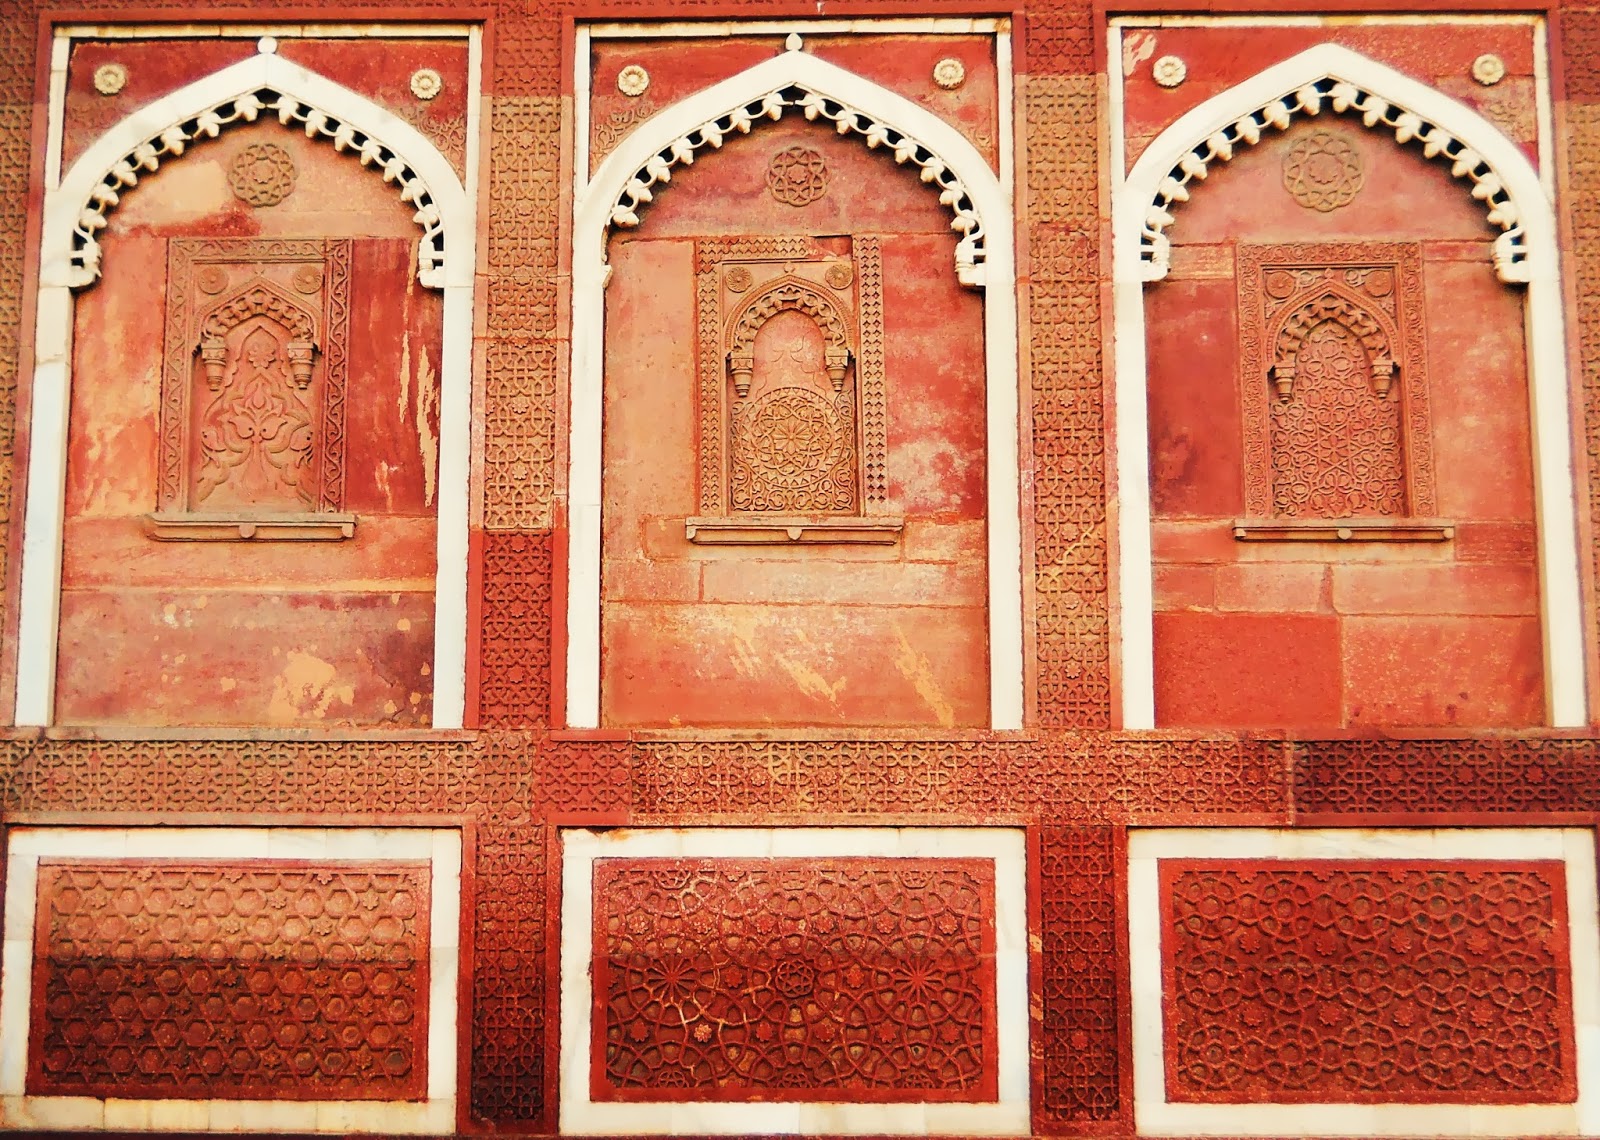 evenfewergoats: Agra 2: Agra Fort